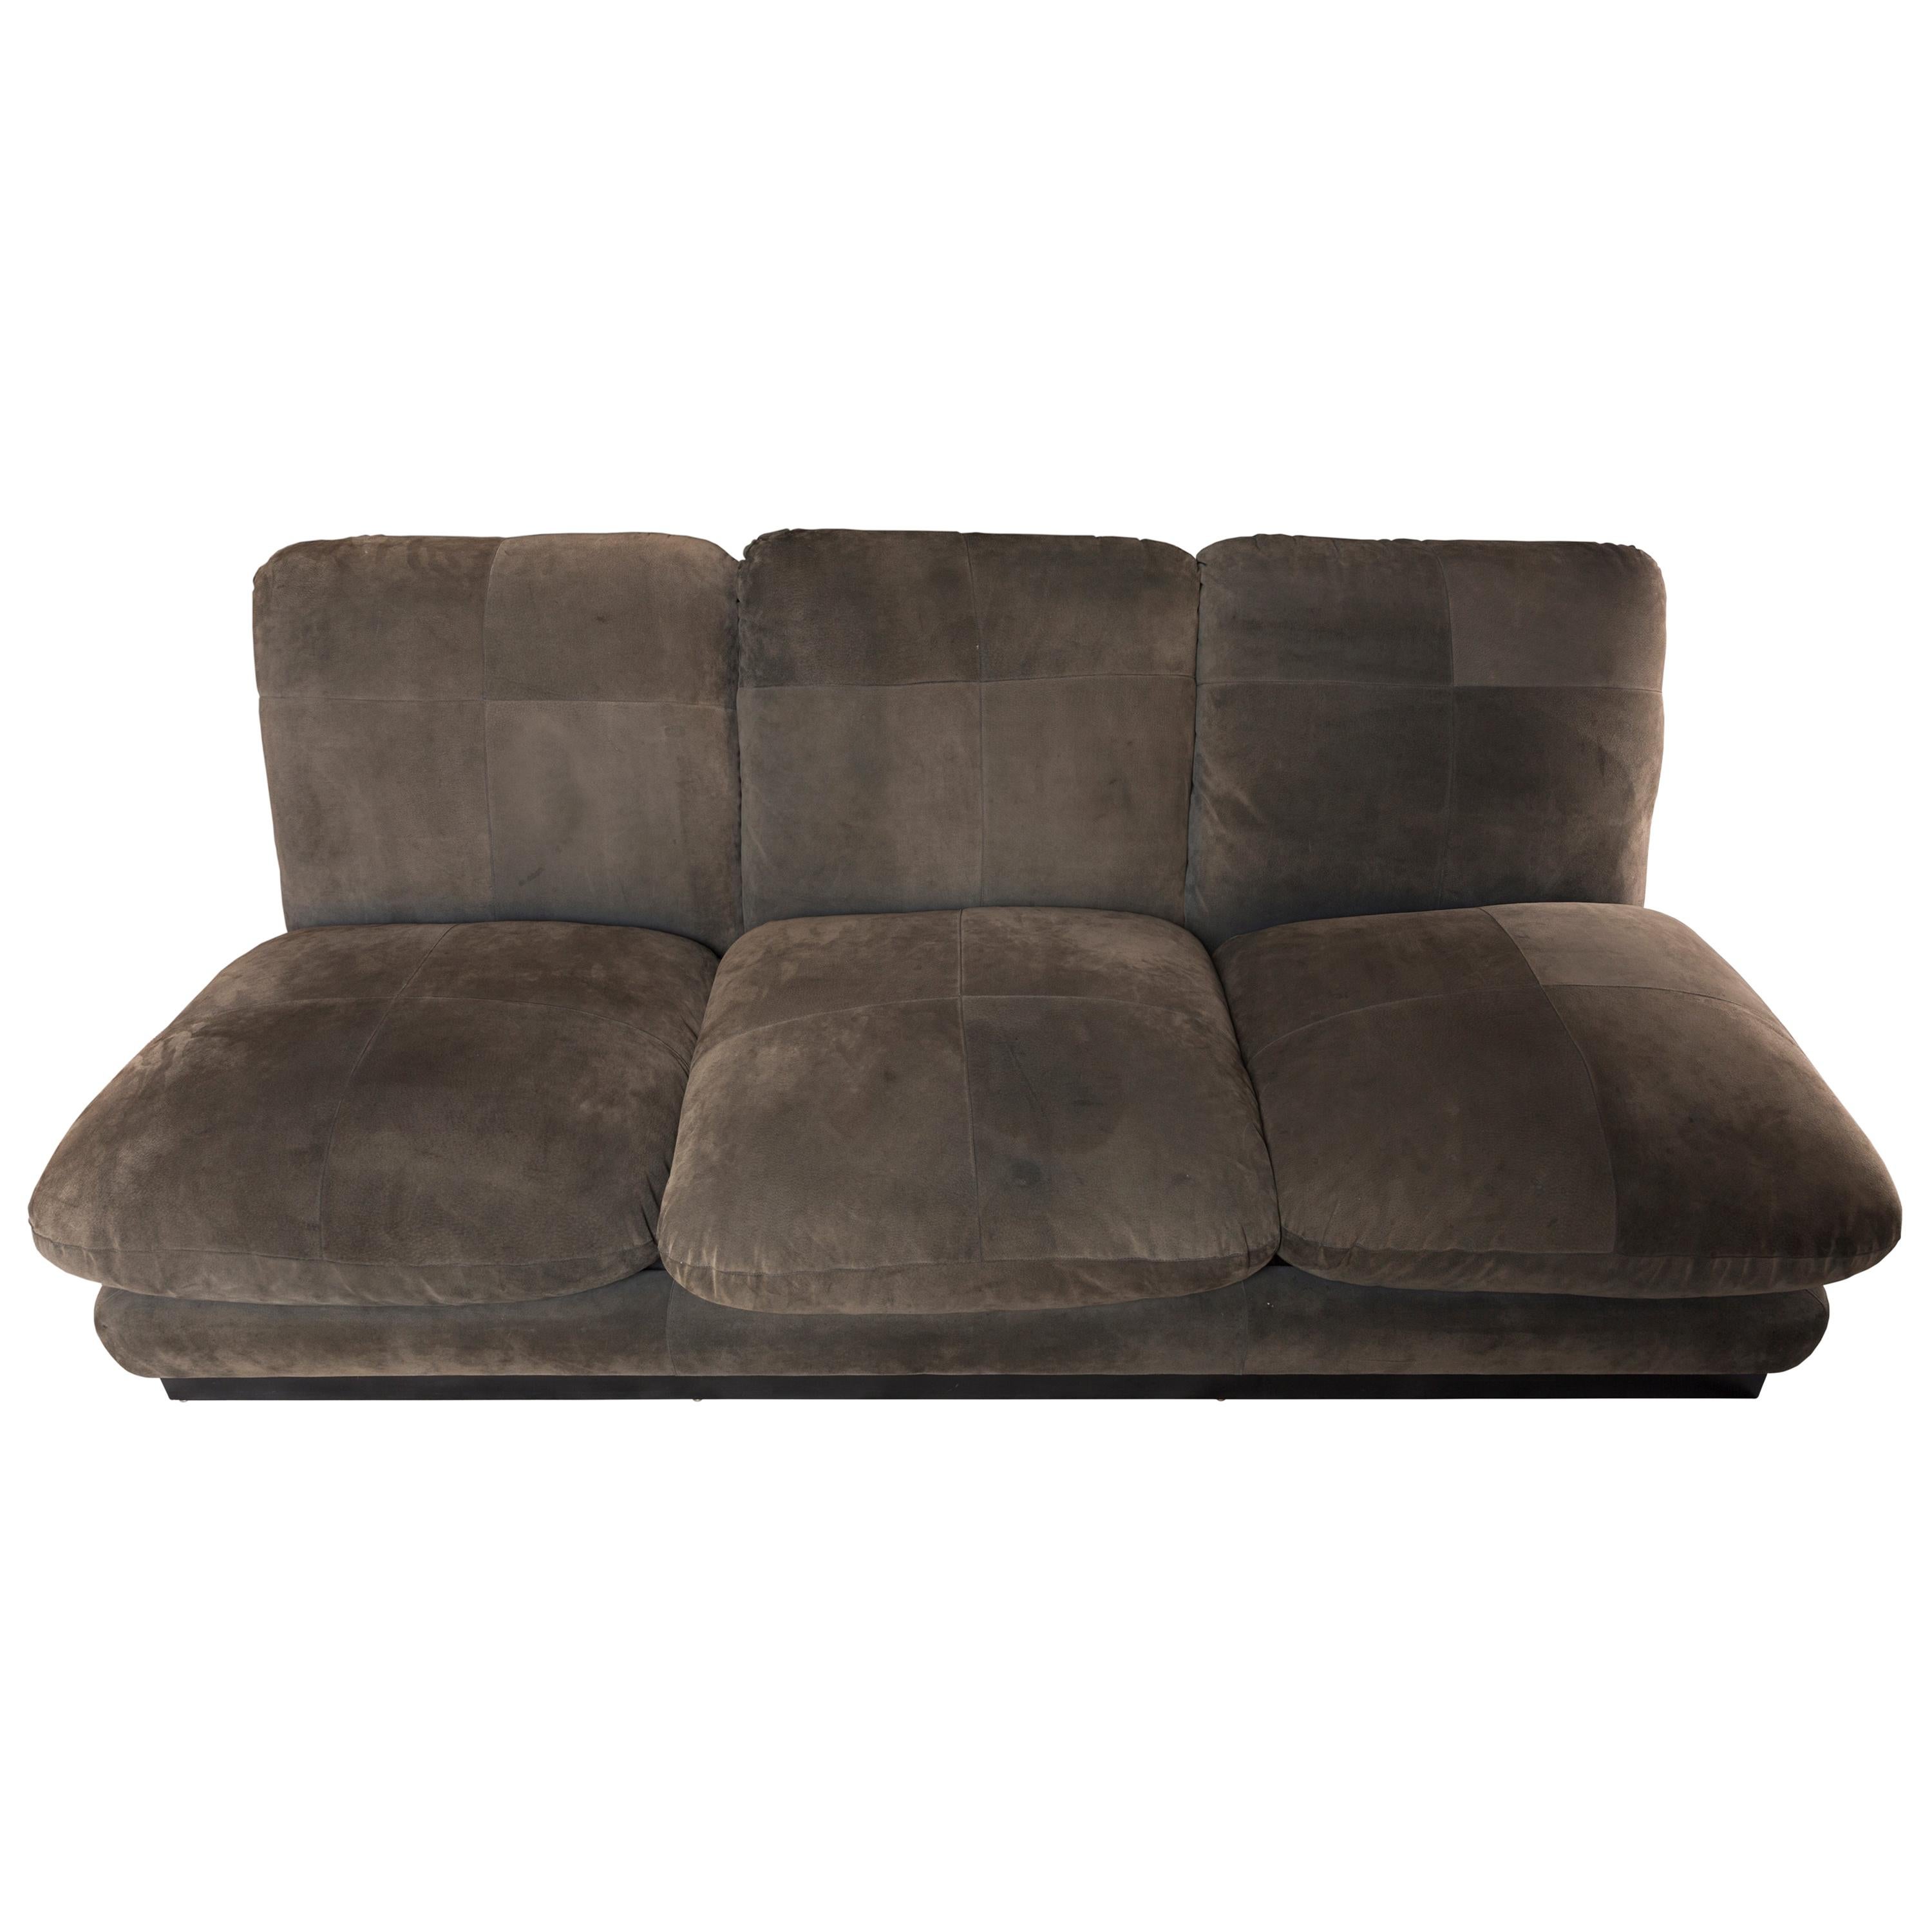 3-Seat Sofa by Willy Rizzo For Sale